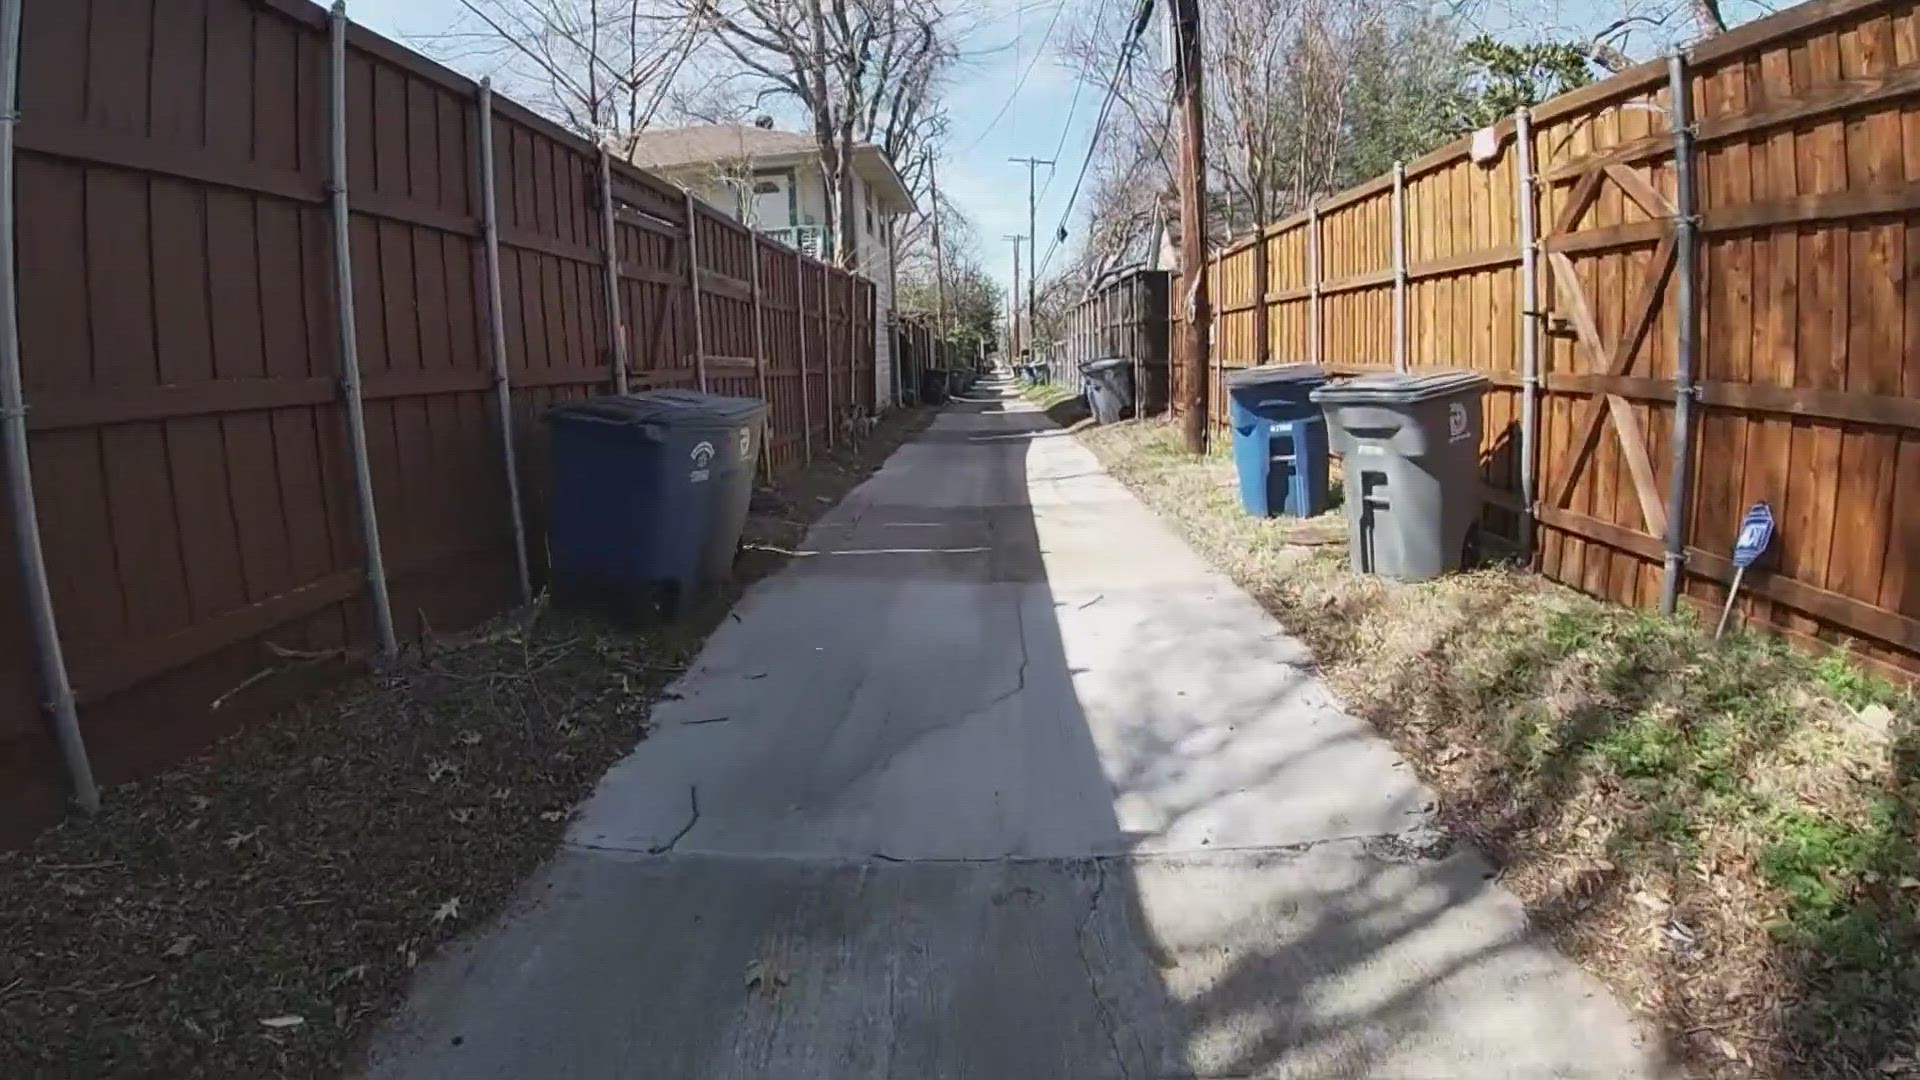 The city's sanitation department says it eventually wants to move nearly 100,000 more households to curbside trash pickup, instead of alleyway pickup.